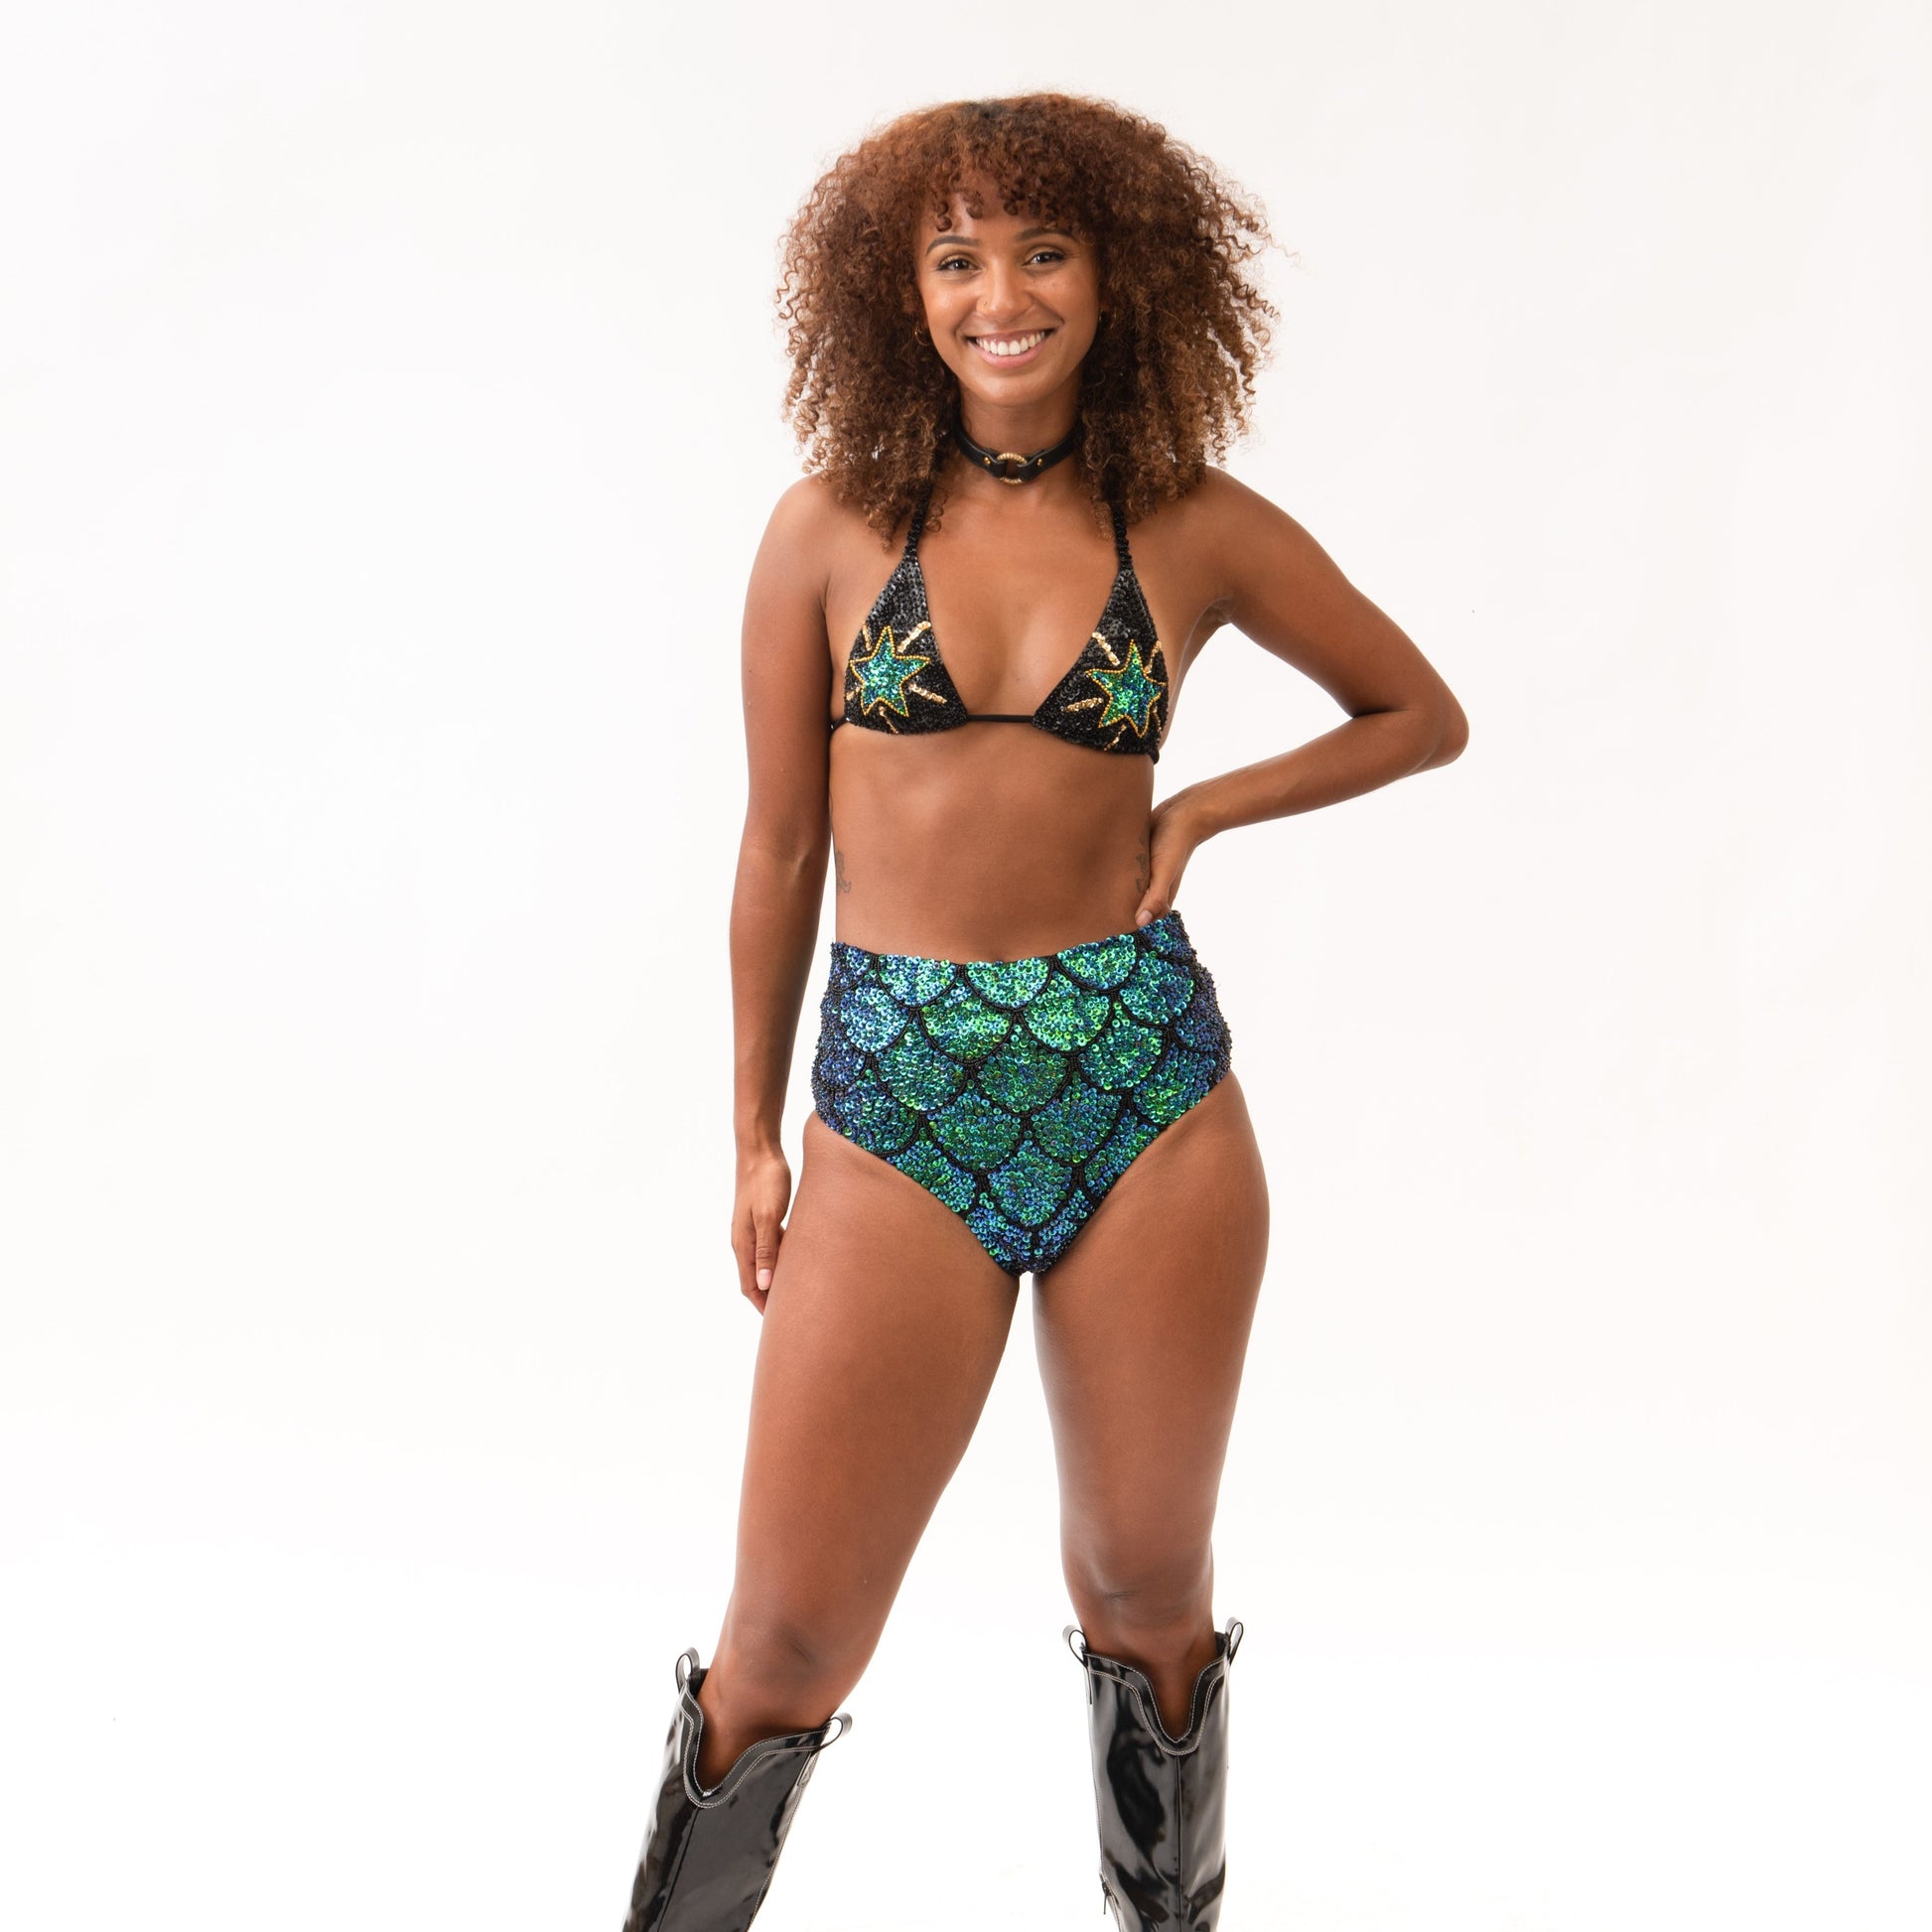 festival outfit matching set with sequin triangle top and hot pants bottoms in mermaid green design, worn with cowboy boots and accessories for rave fashion 